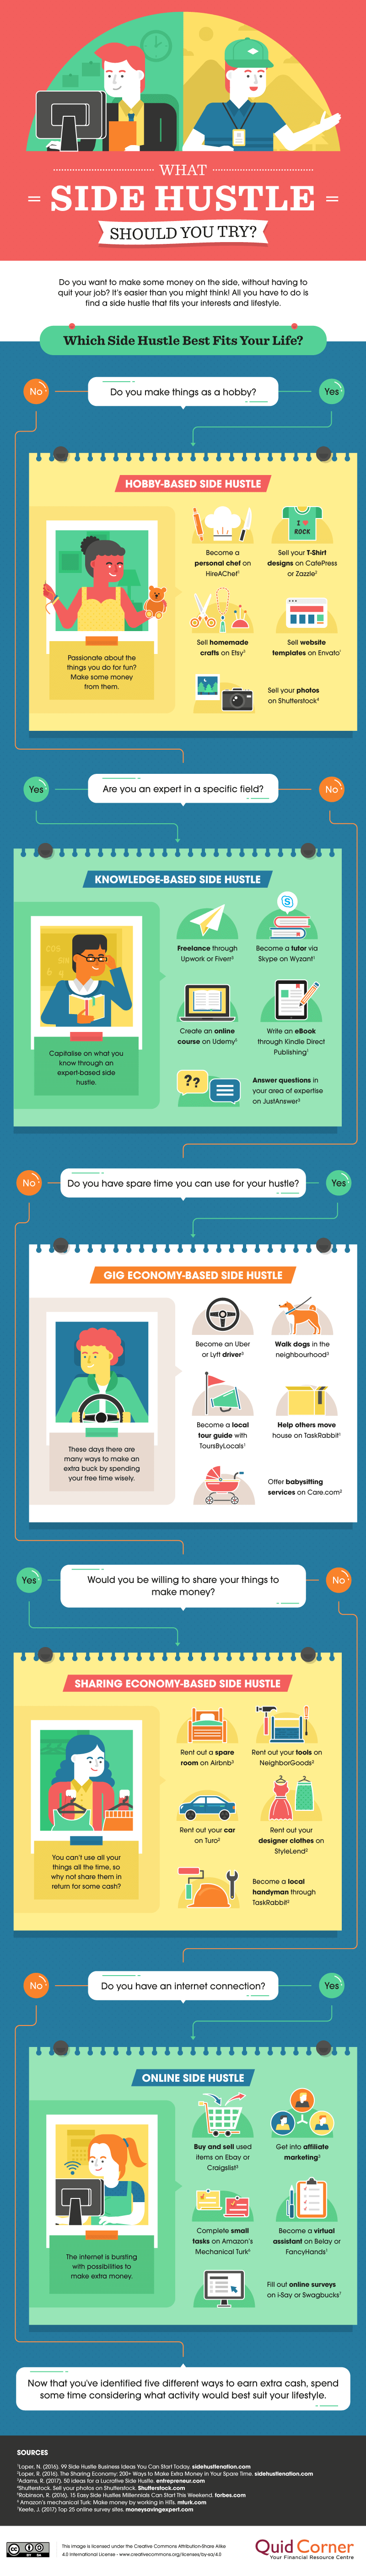 What-side-hustle-should-you-try-infographic